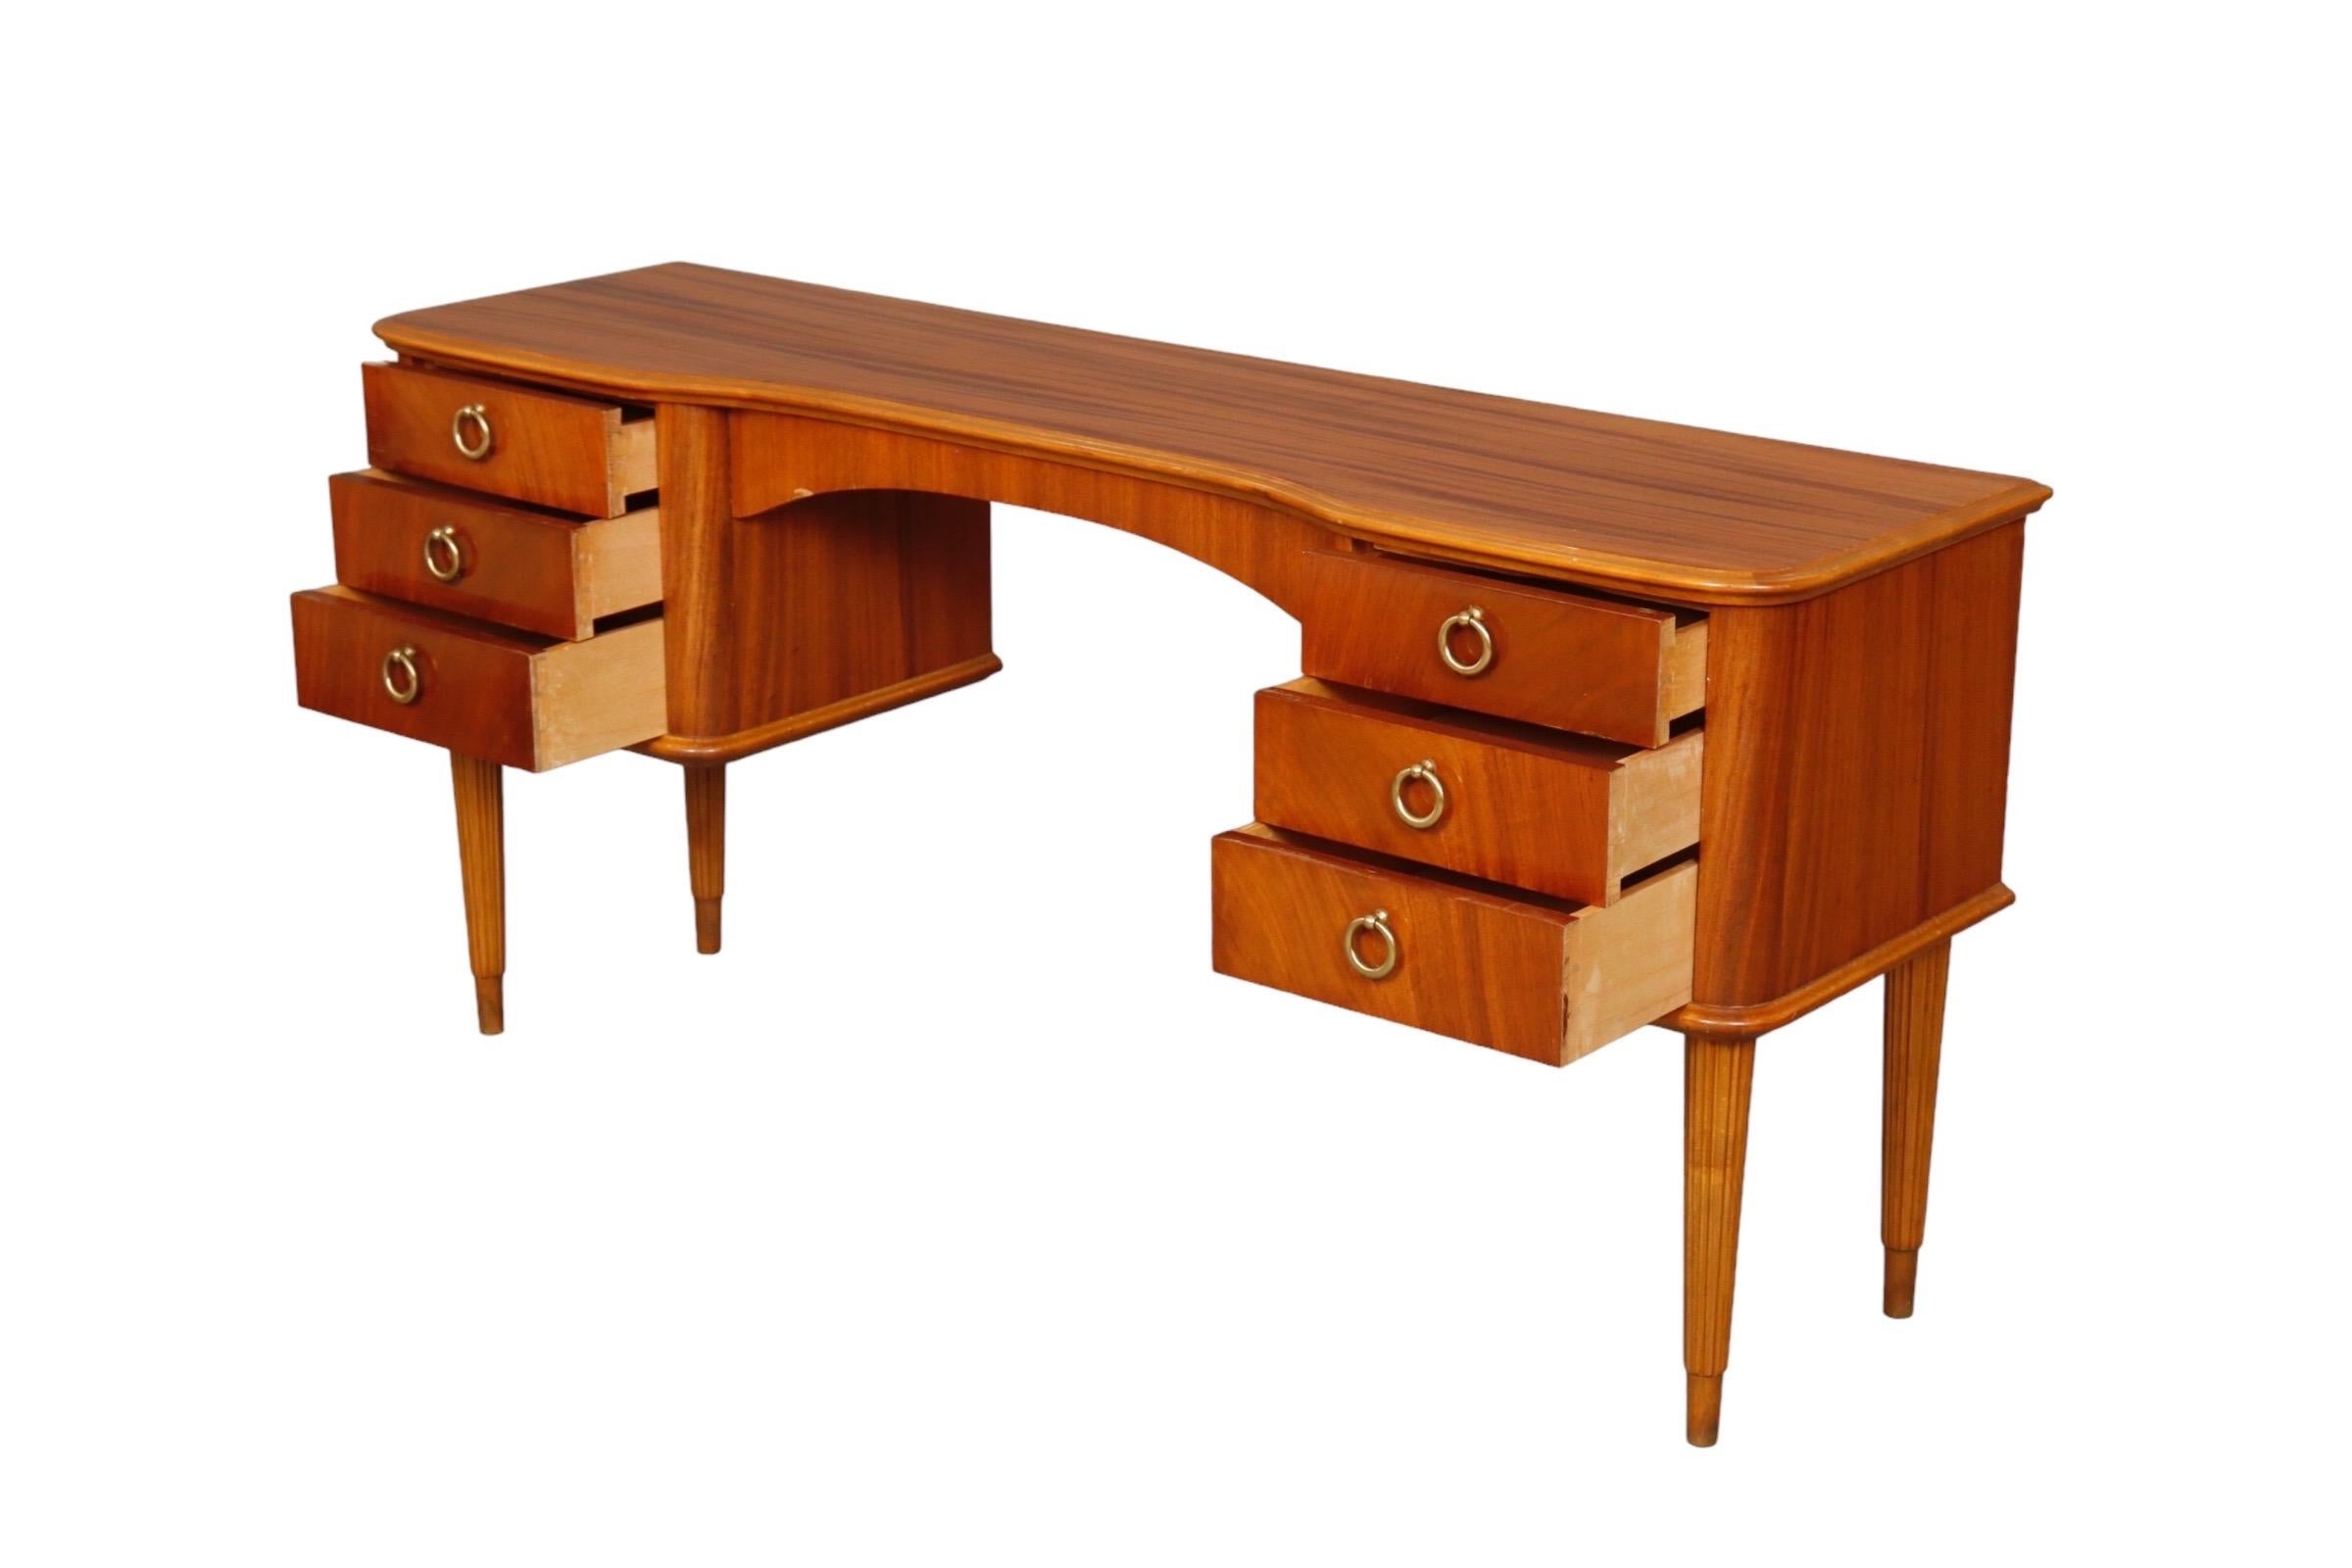 A 1960’s mid century desk that could also be used as a vanity. Six dovetailed drawers that open with round brass pulls are decorated with crotch mahogany veneers. The frame is made of teak with rich grain and round tapered legs are